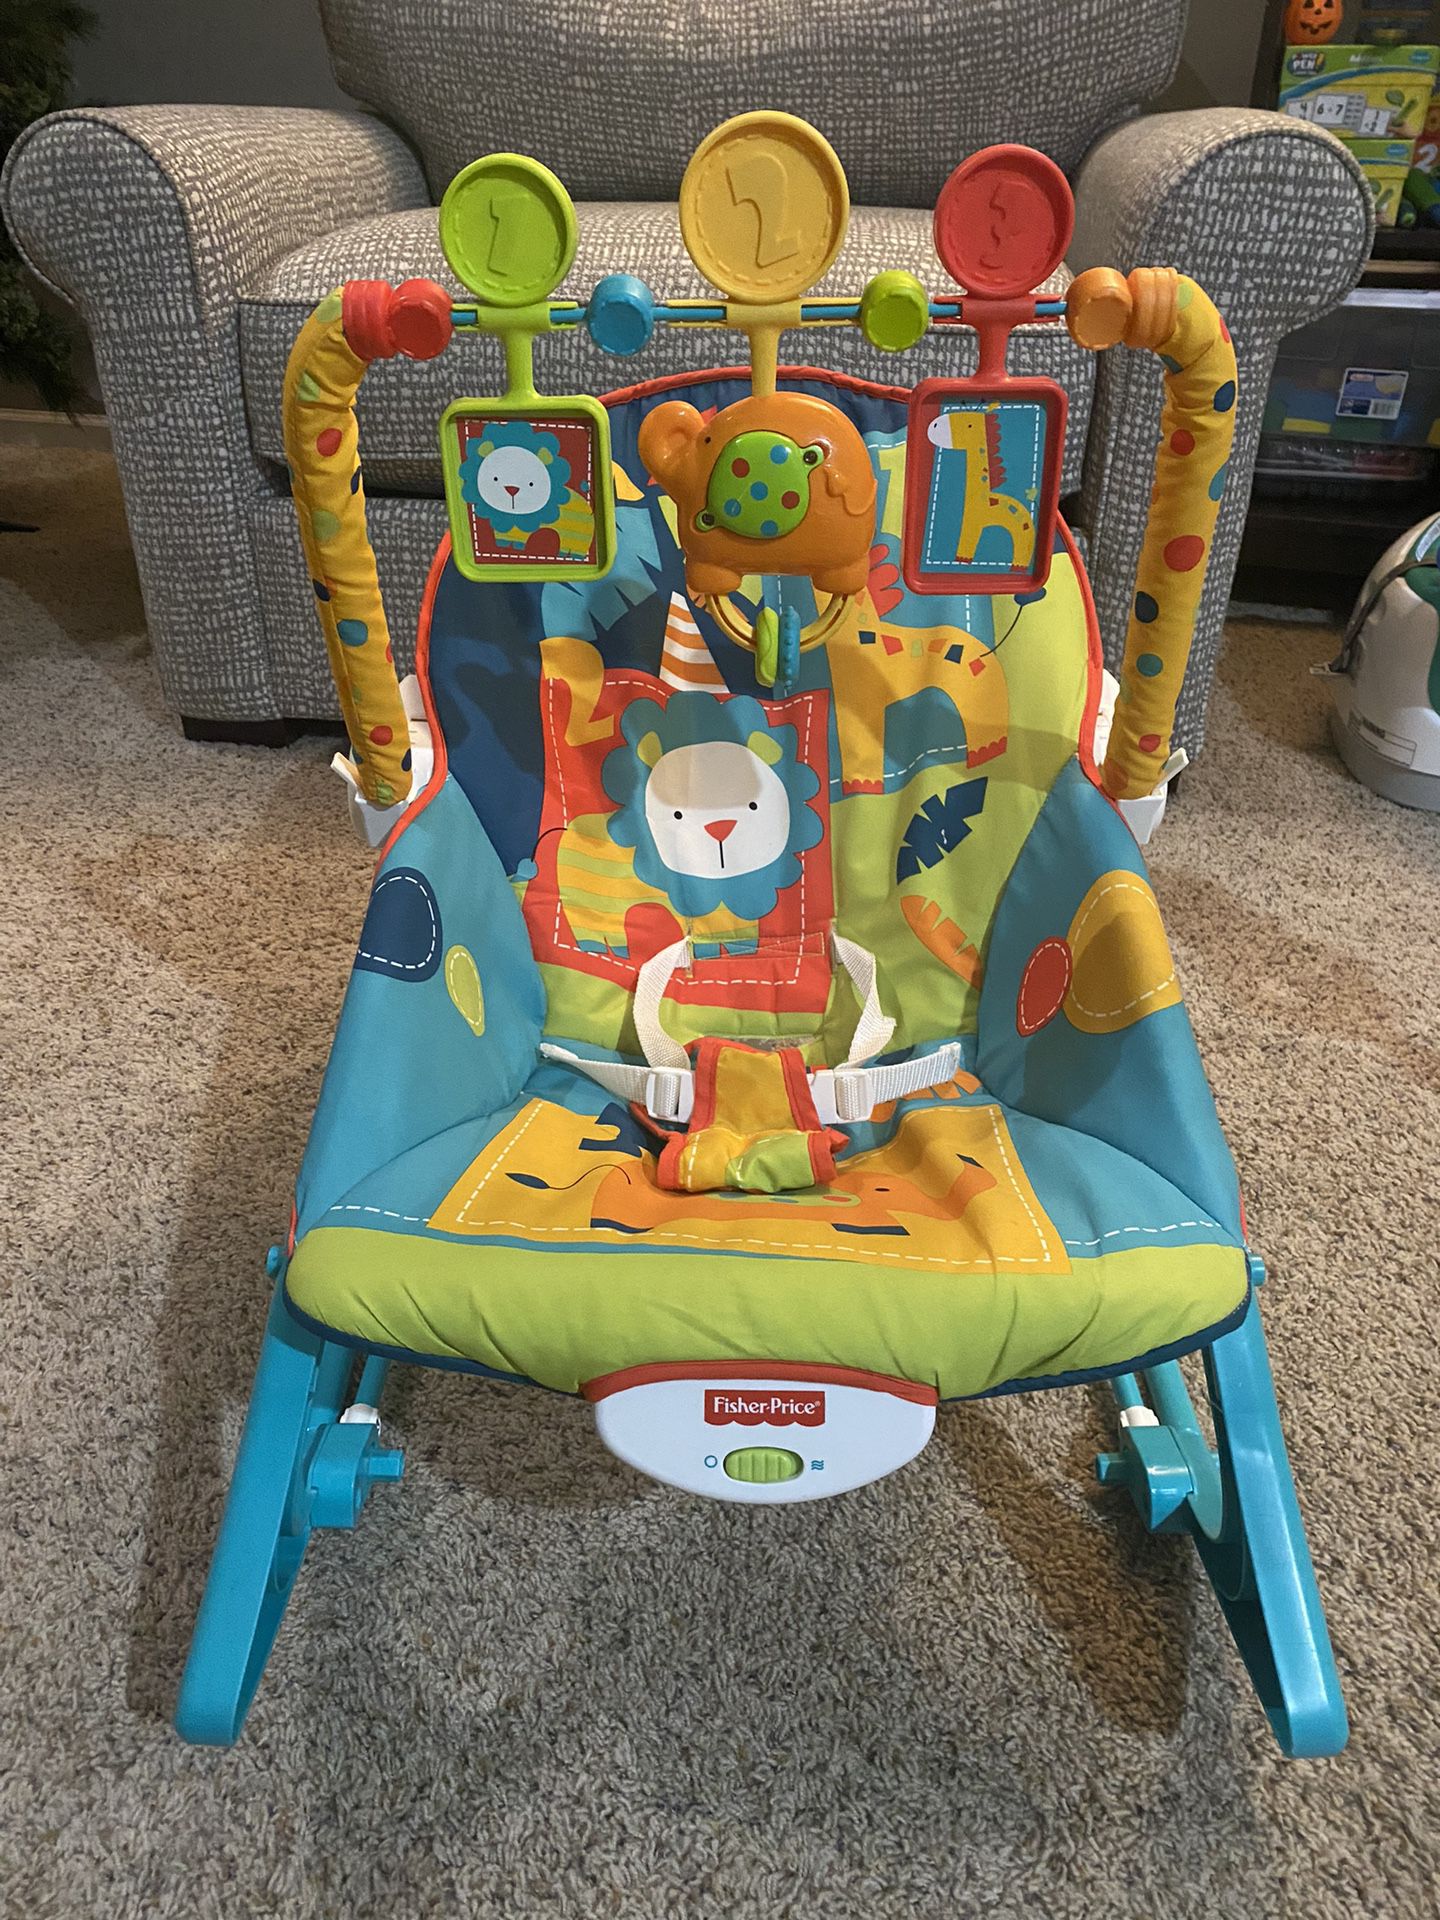 Baby Bouncer Infant to Toddler Rocker & Seat with Vibrations and Removable -Toy Bar